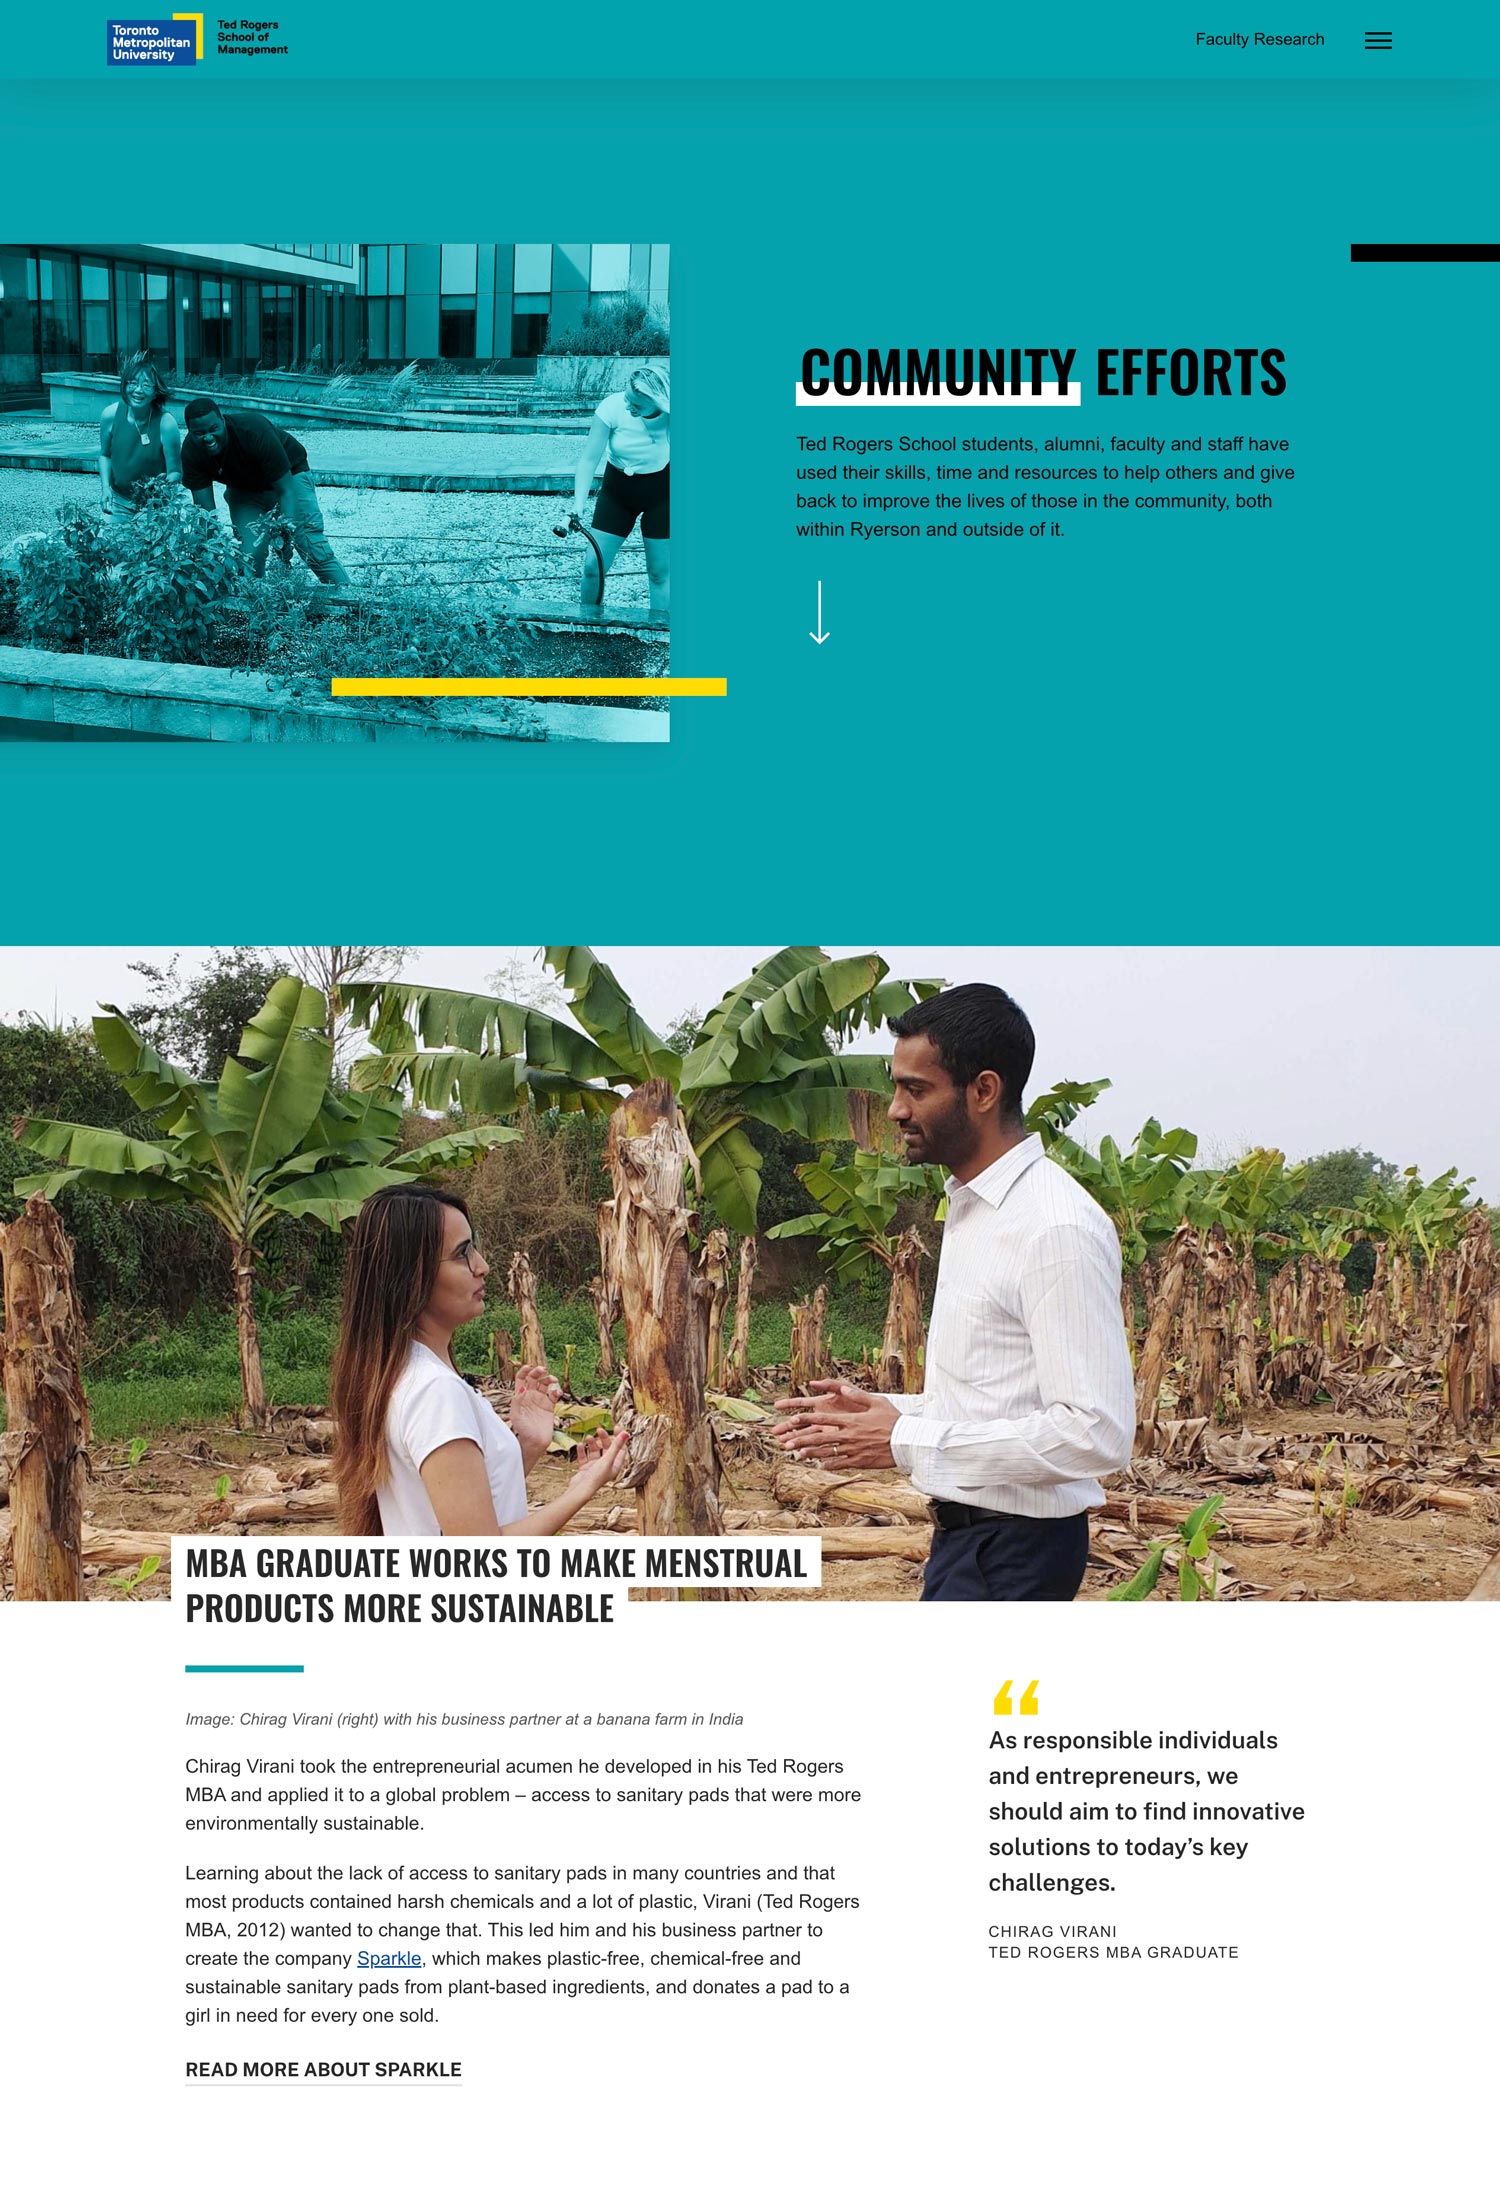 Introduction to the community section of the report website. The intro has a teal background and the story below has an image of two people talking in front of banana trees.